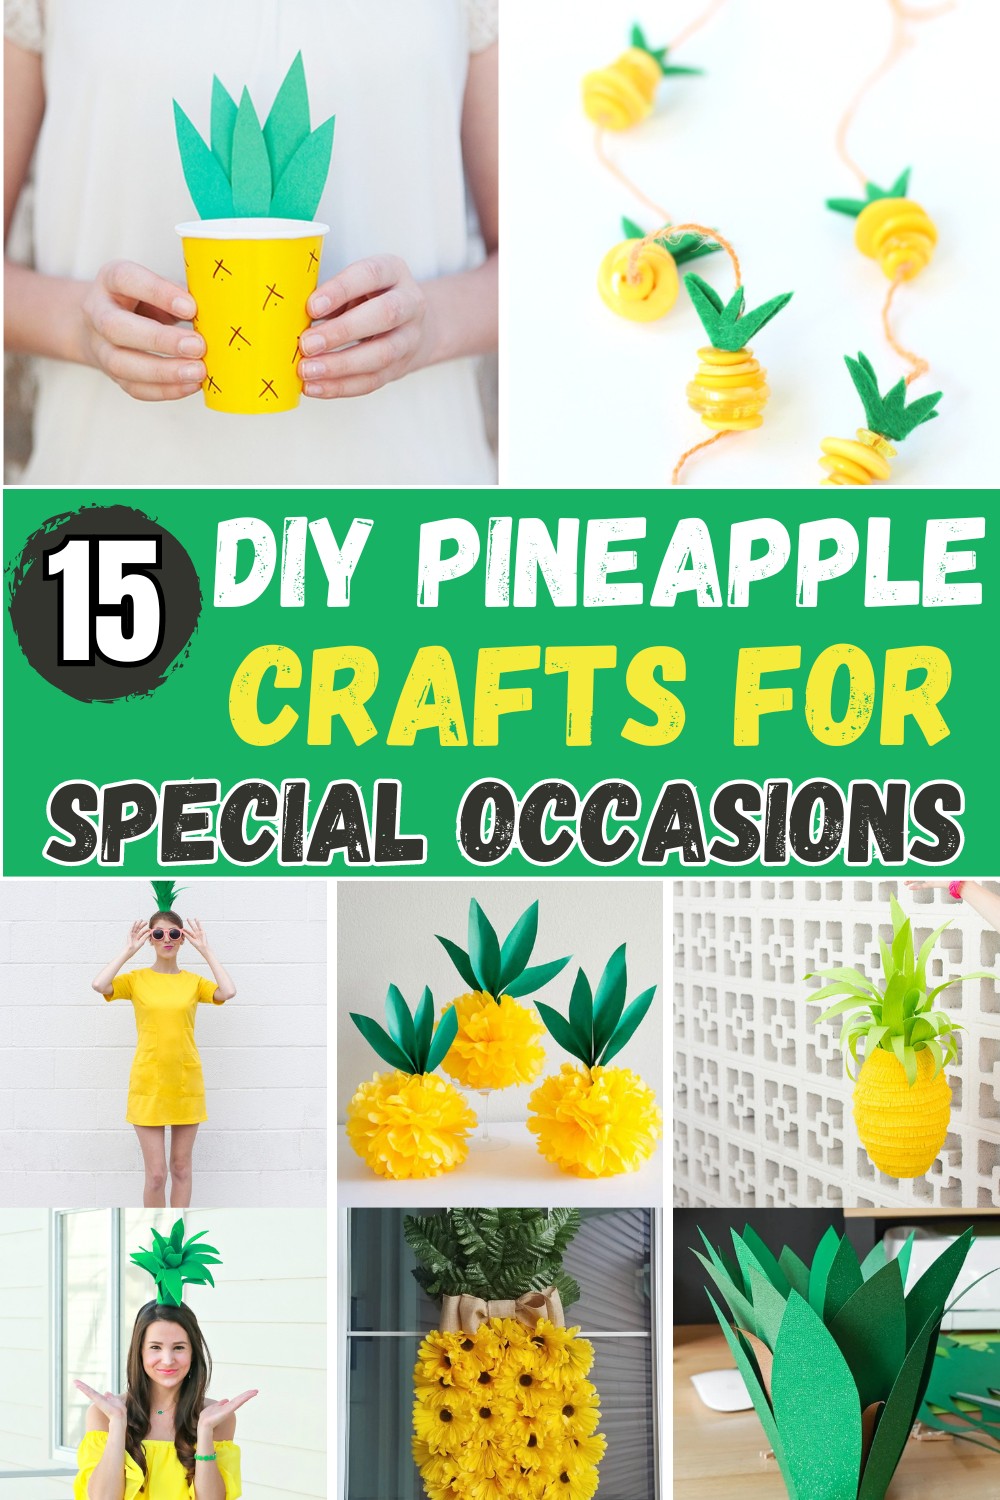 DIY Pineapple Crafts For Special Occasions